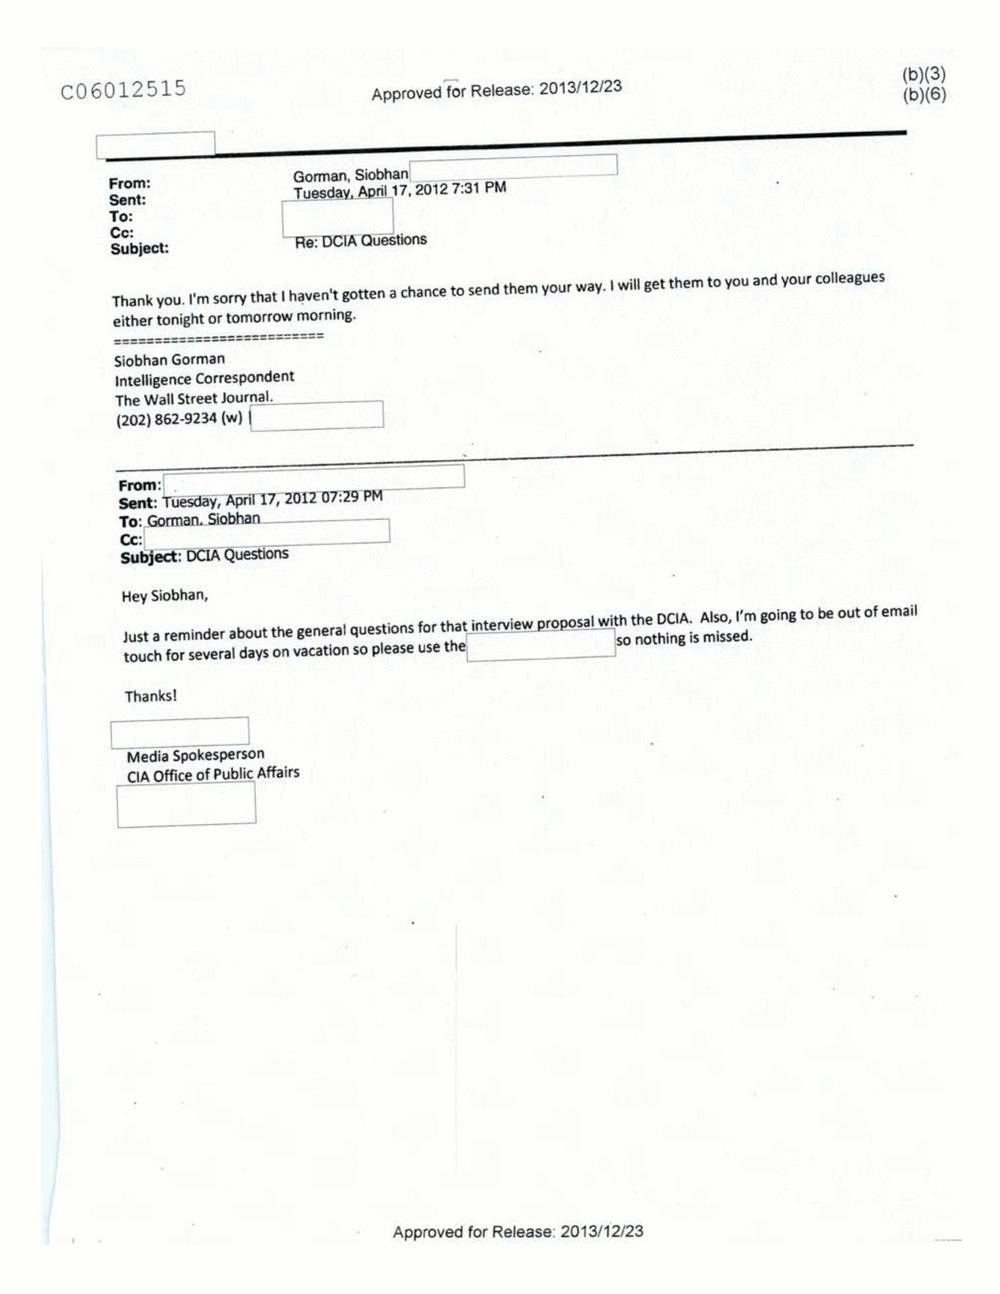 Page 32 from Email Correspondence Between Reporters and CIA Flacks